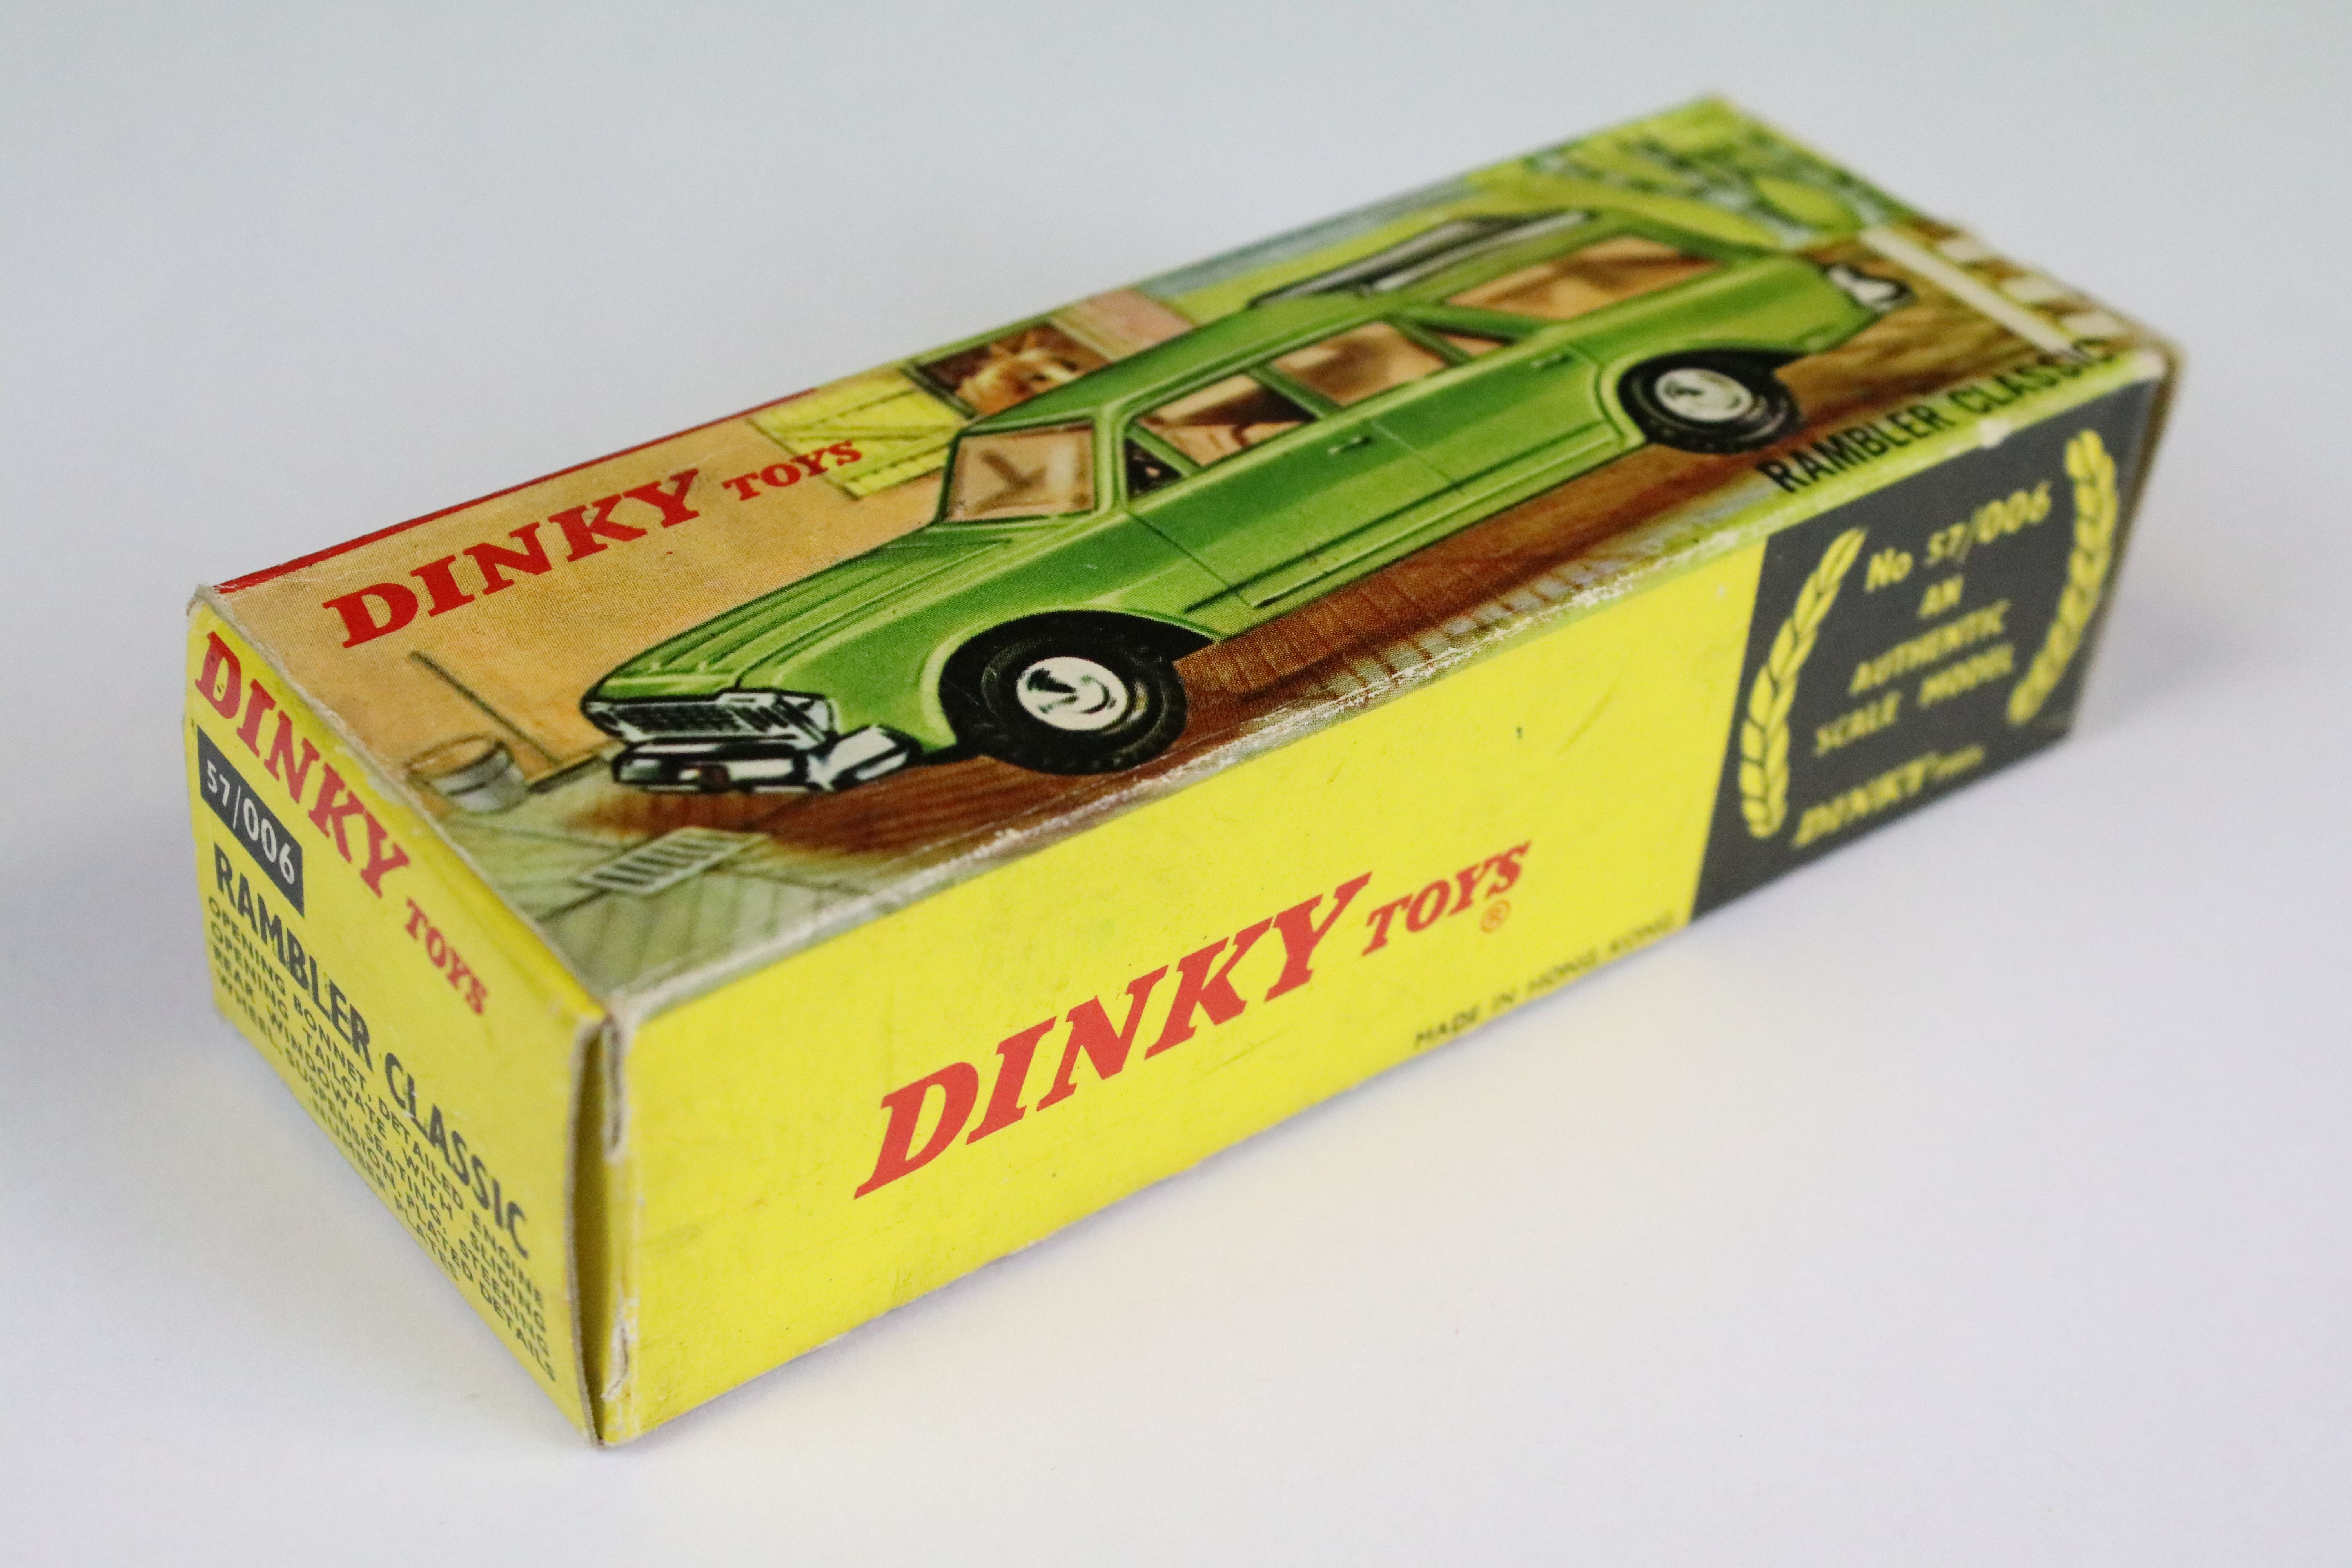 Boxed Hong Kong Dinky 57/006 Rambler Classic diecast model in pale green with silver roof and - Image 5 of 5